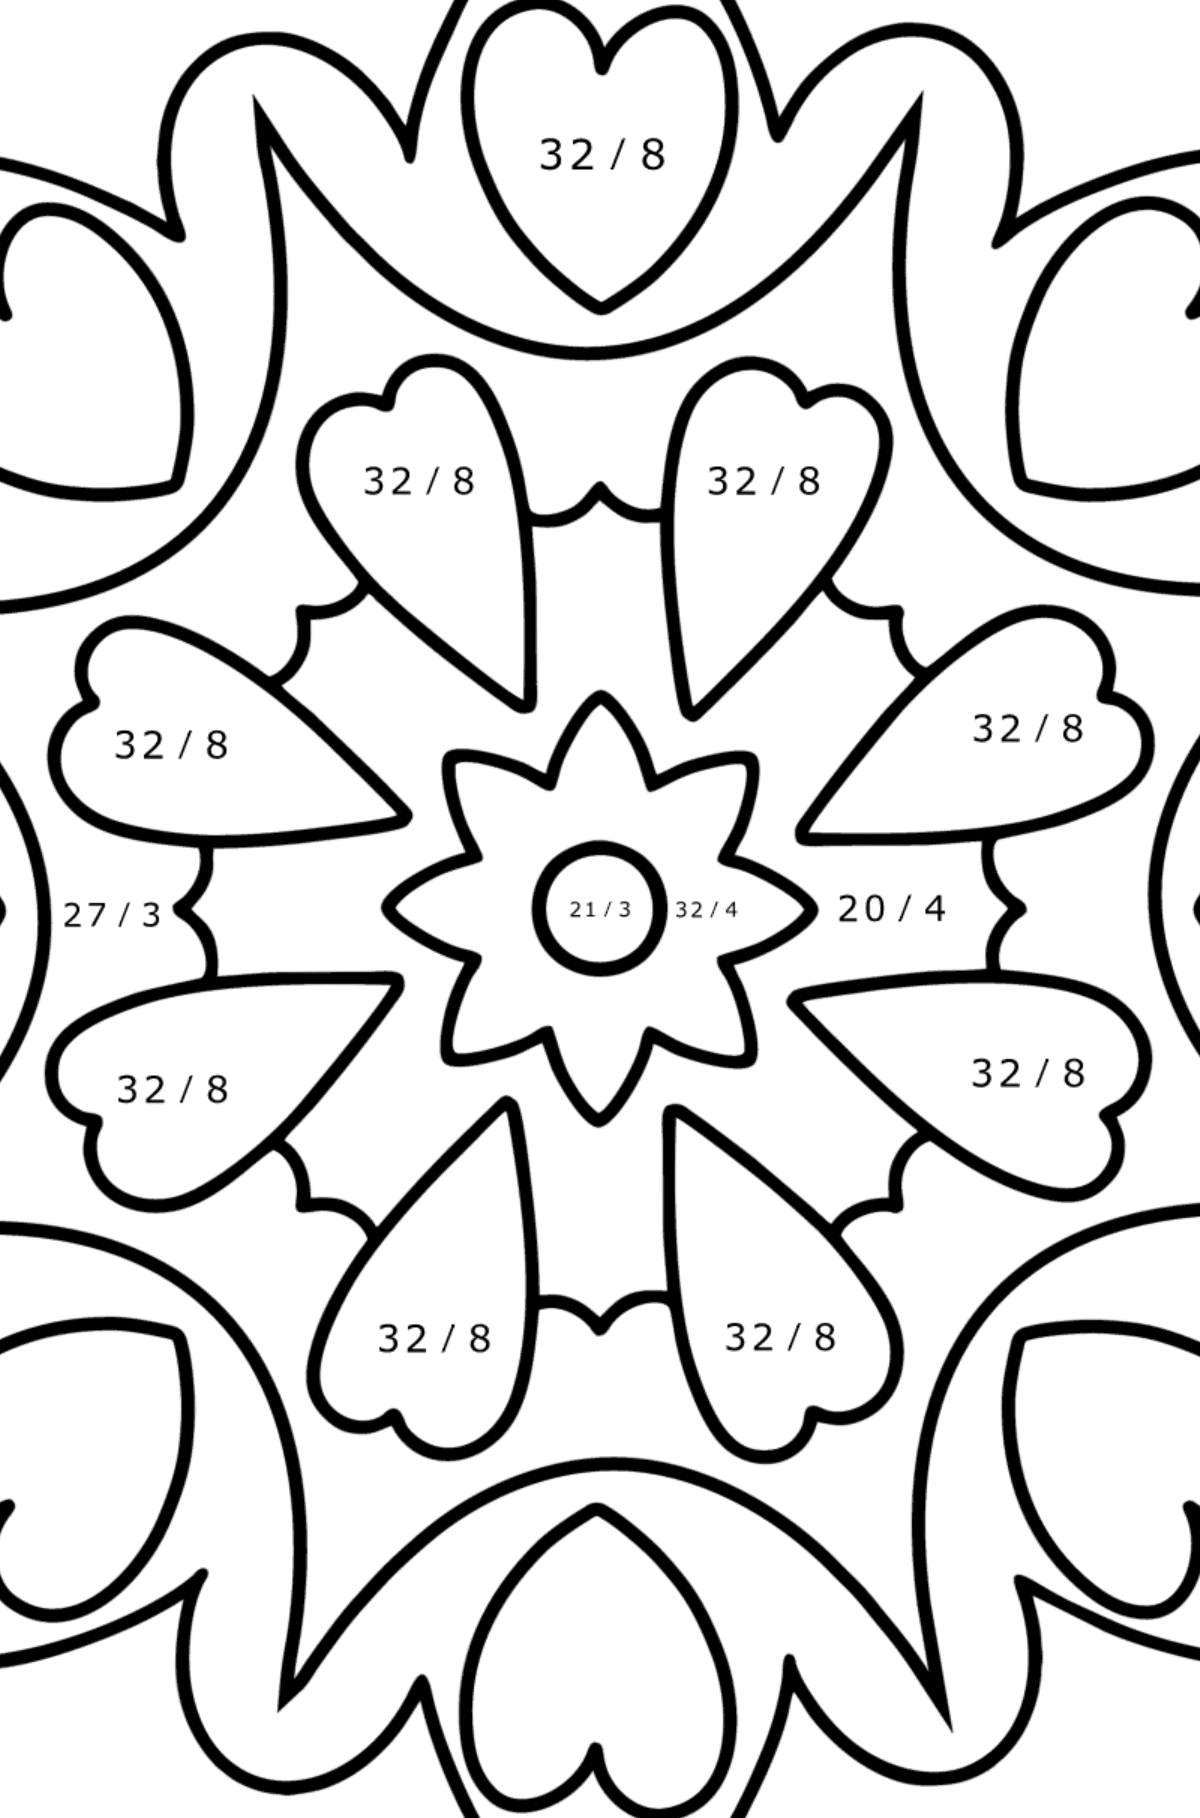 Mandala coloring page - 21 elements - Math Coloring - Division for Kids